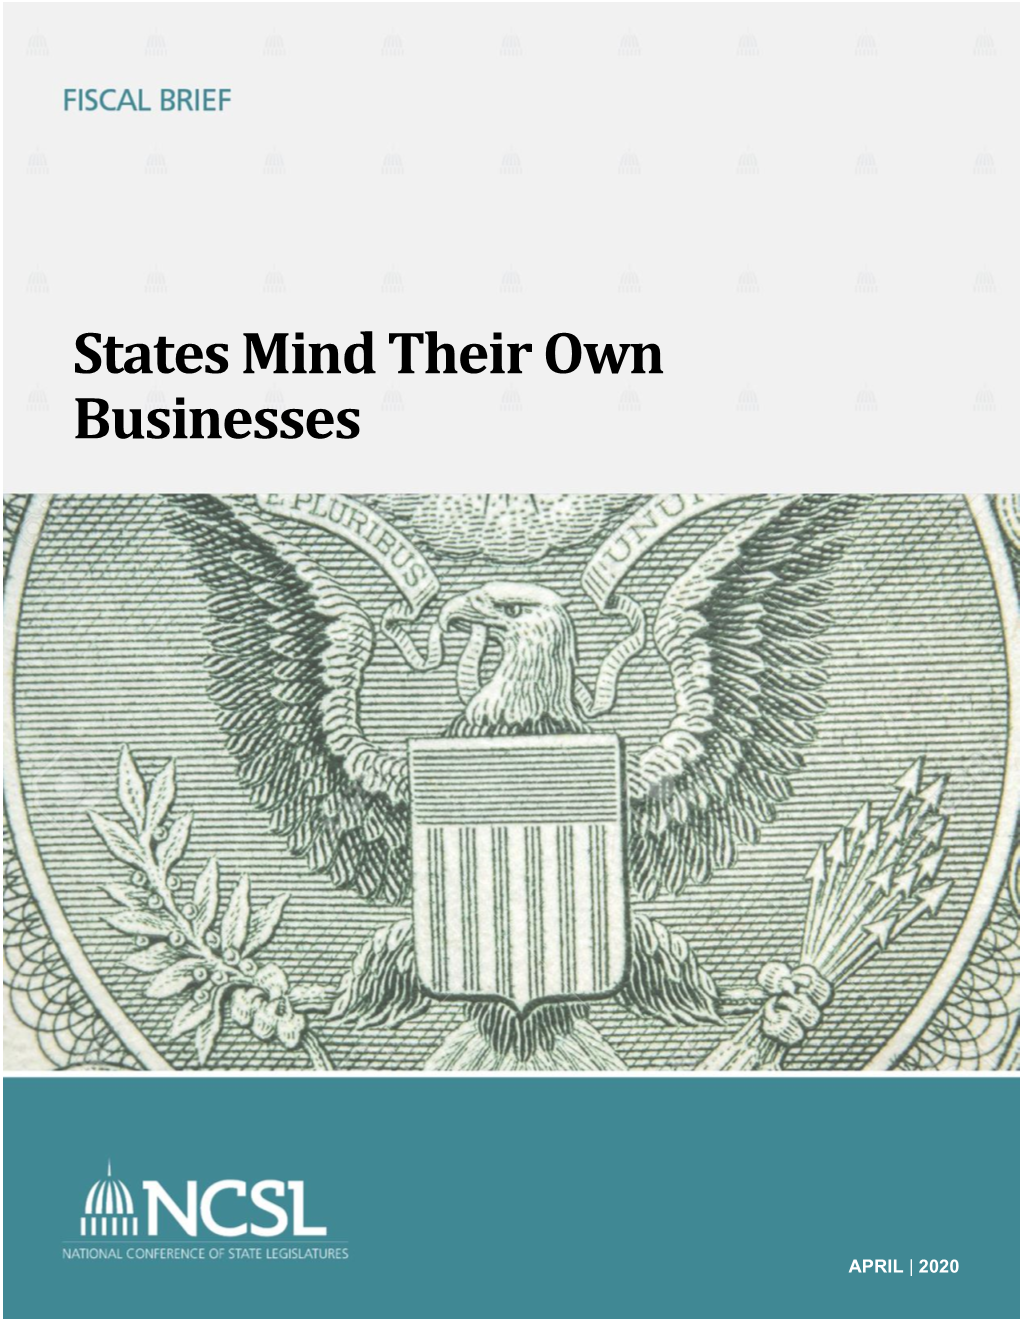 States Mind Their Own Businesses